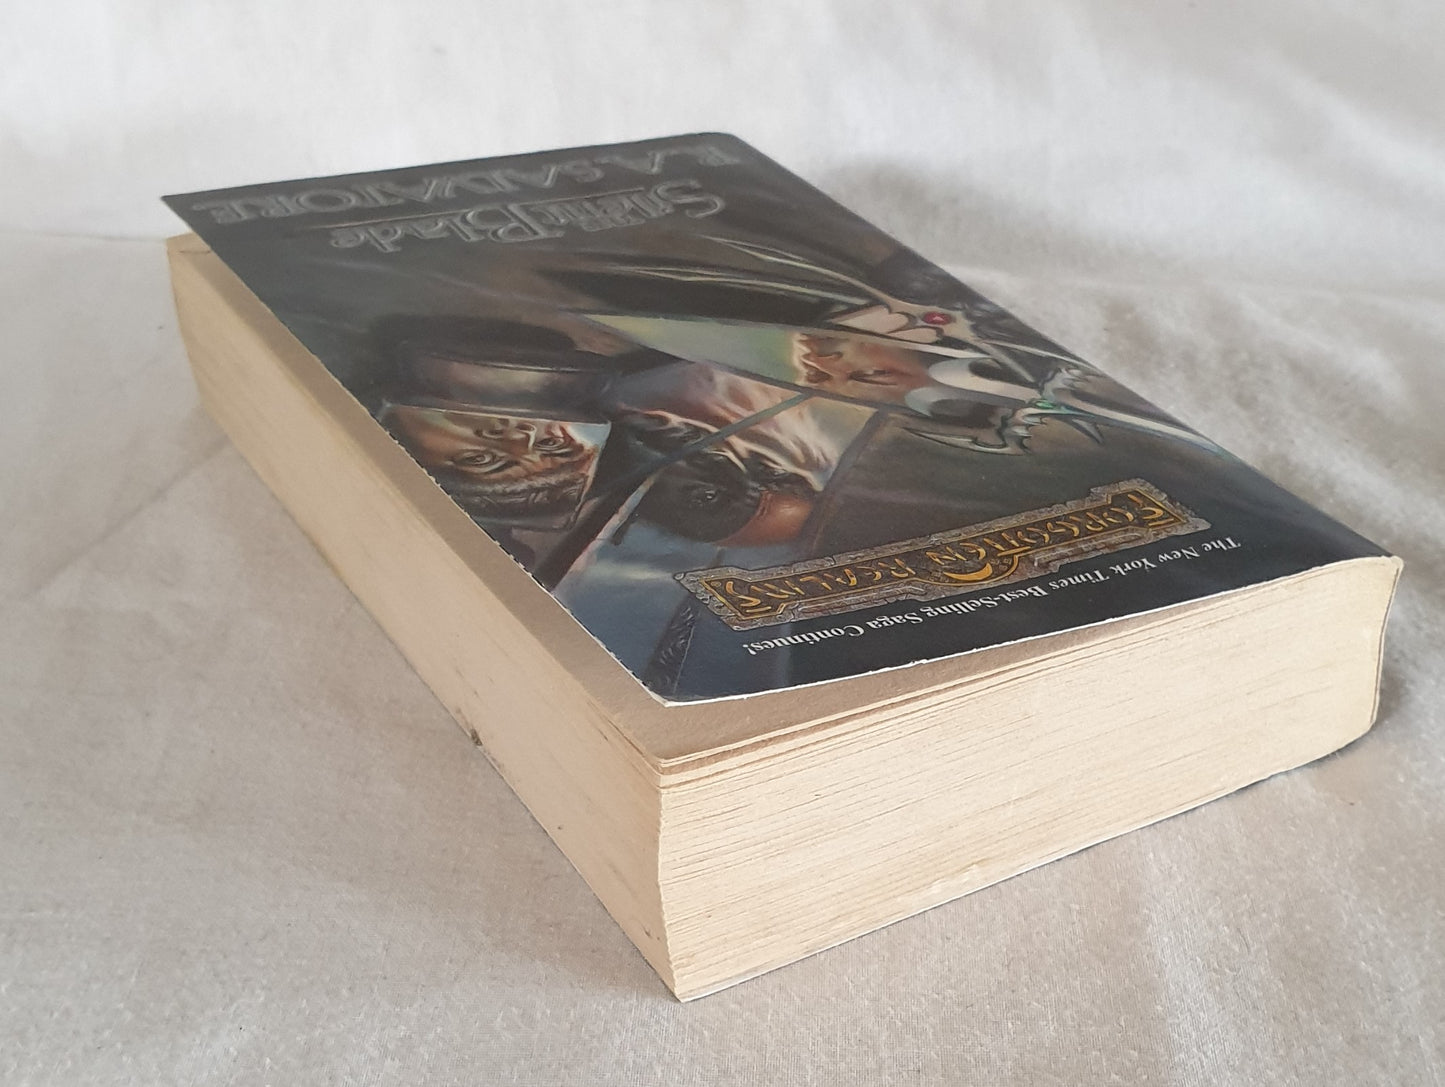 The Silent Blade by R. A. Salvatore